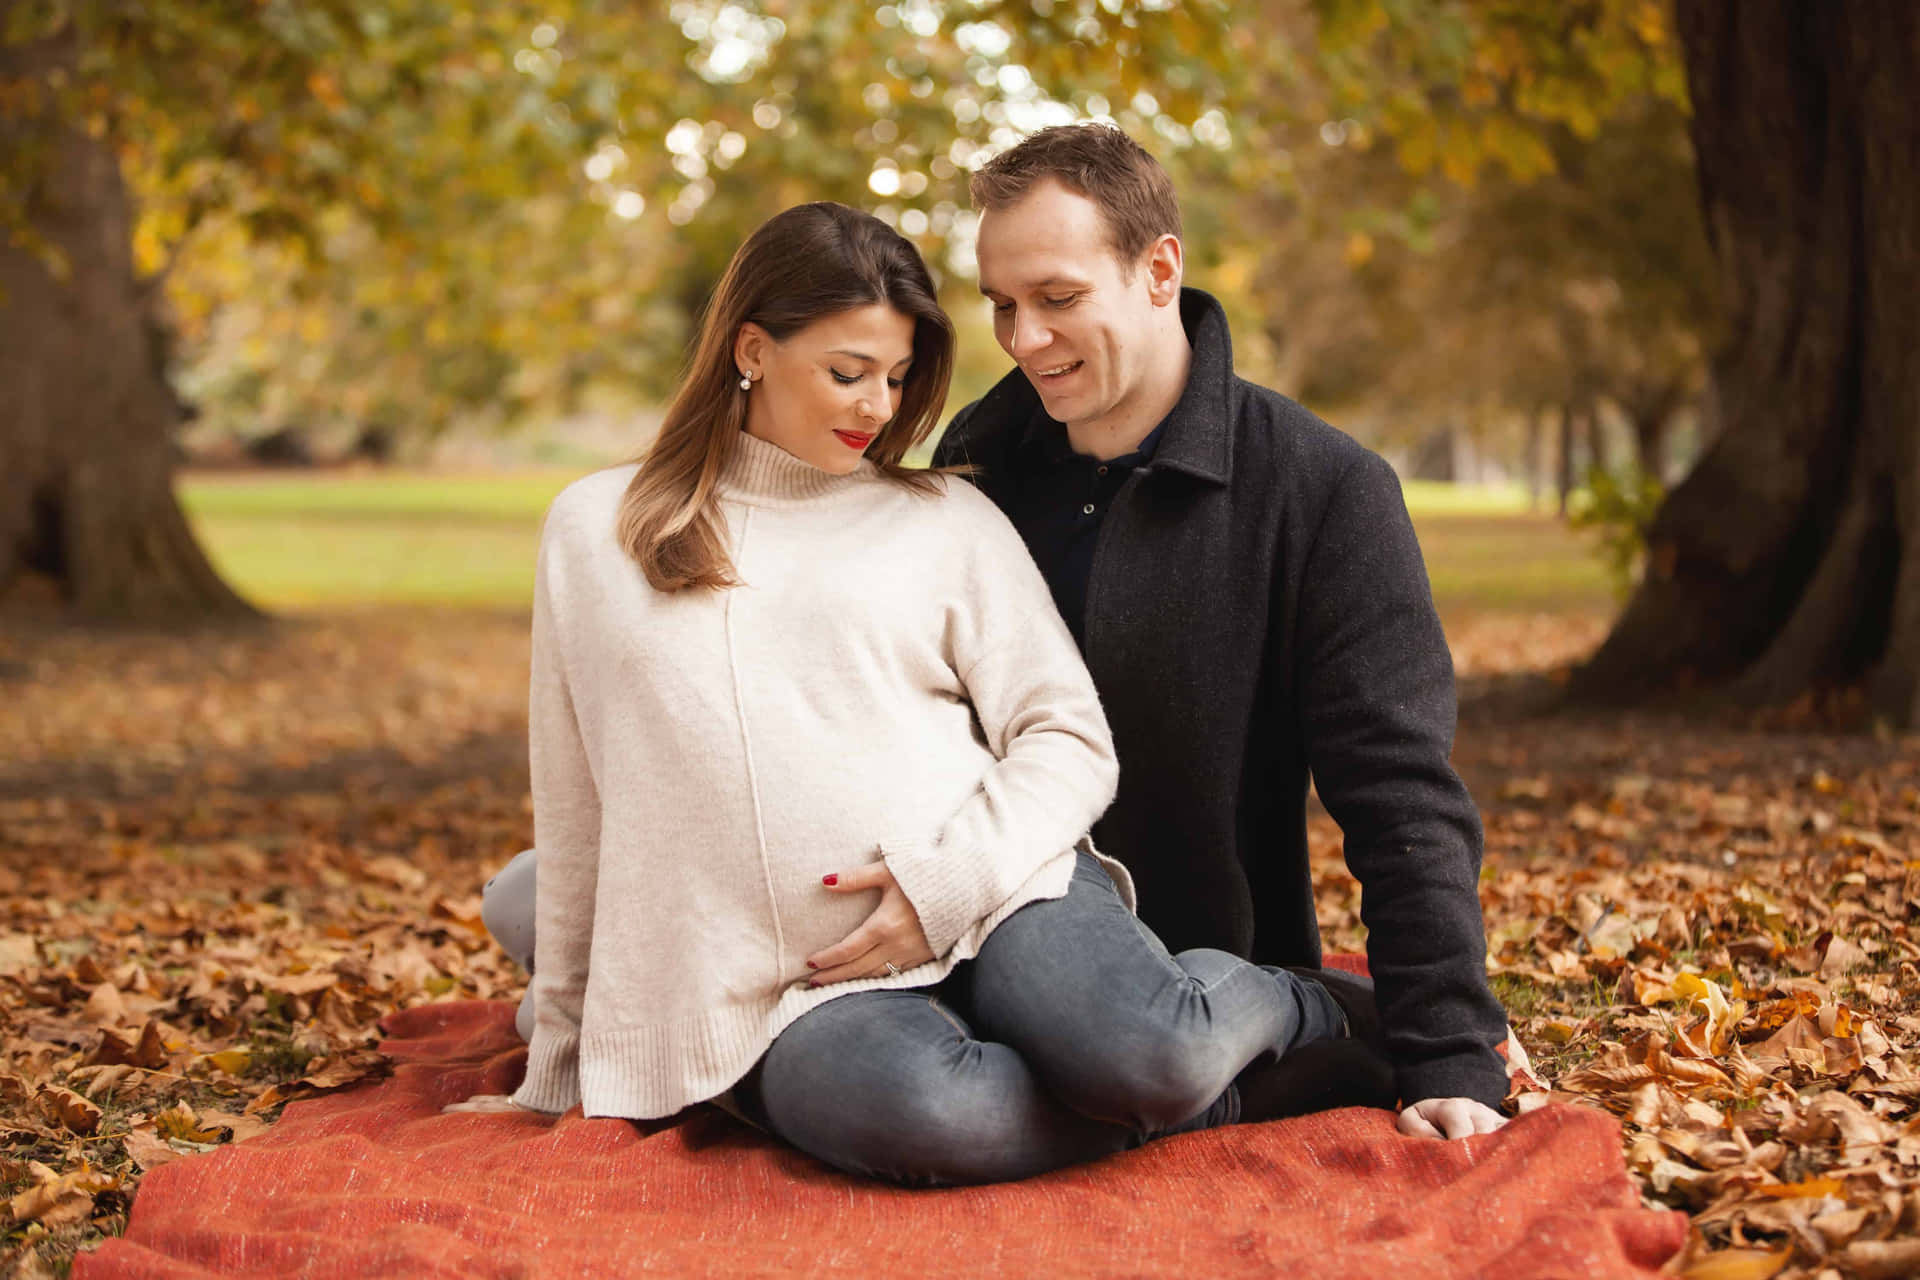 A Pregnant Couple Sitting On A Blanket In The Autumn Leaves